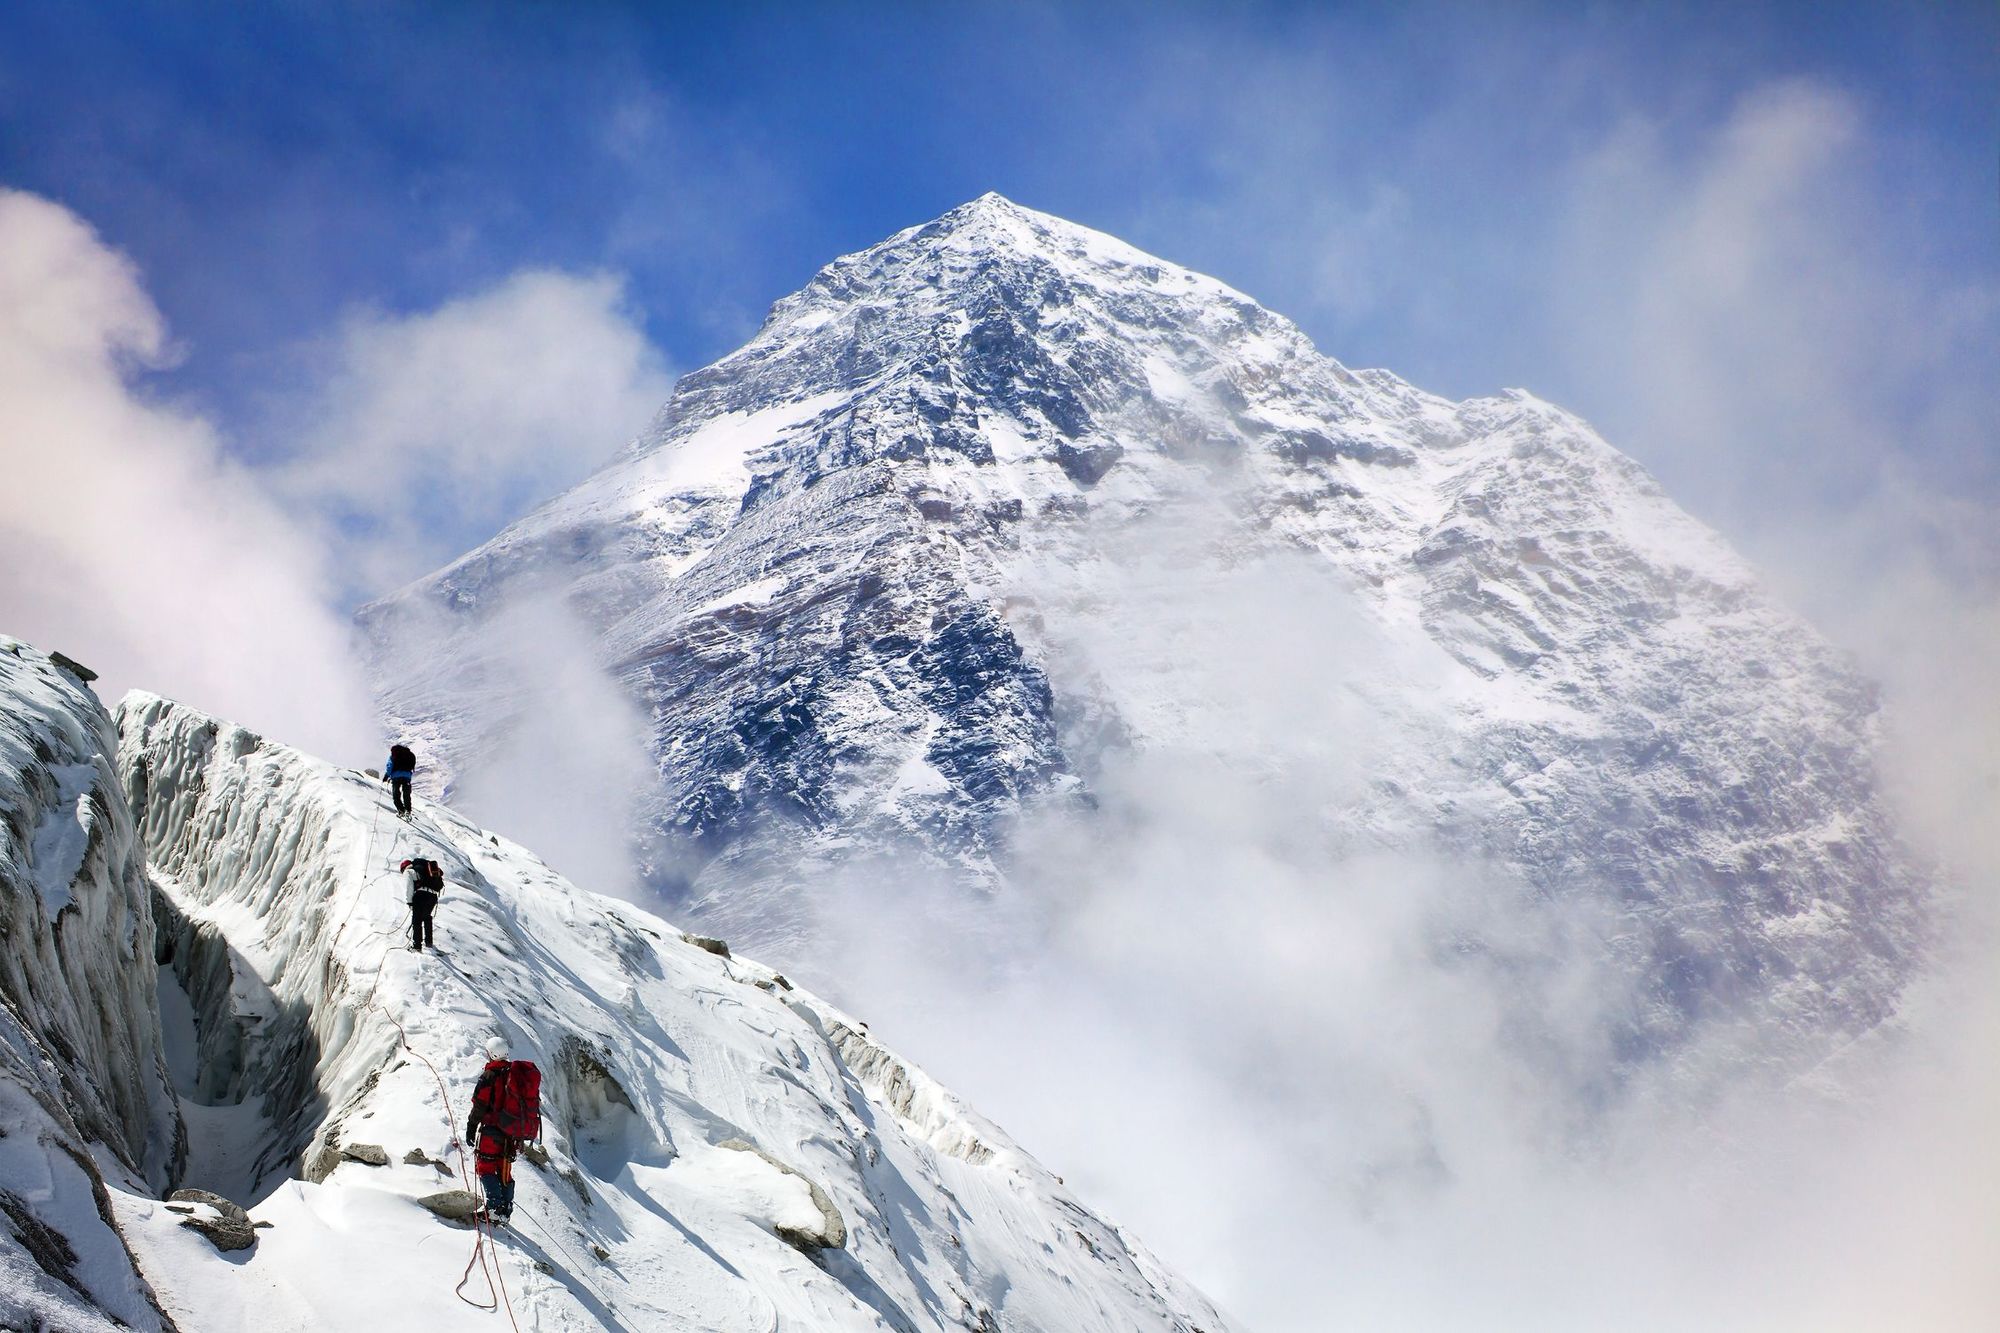 A nervous ascent up Mount Everest, as featured in many of the best mountaineering documentaries